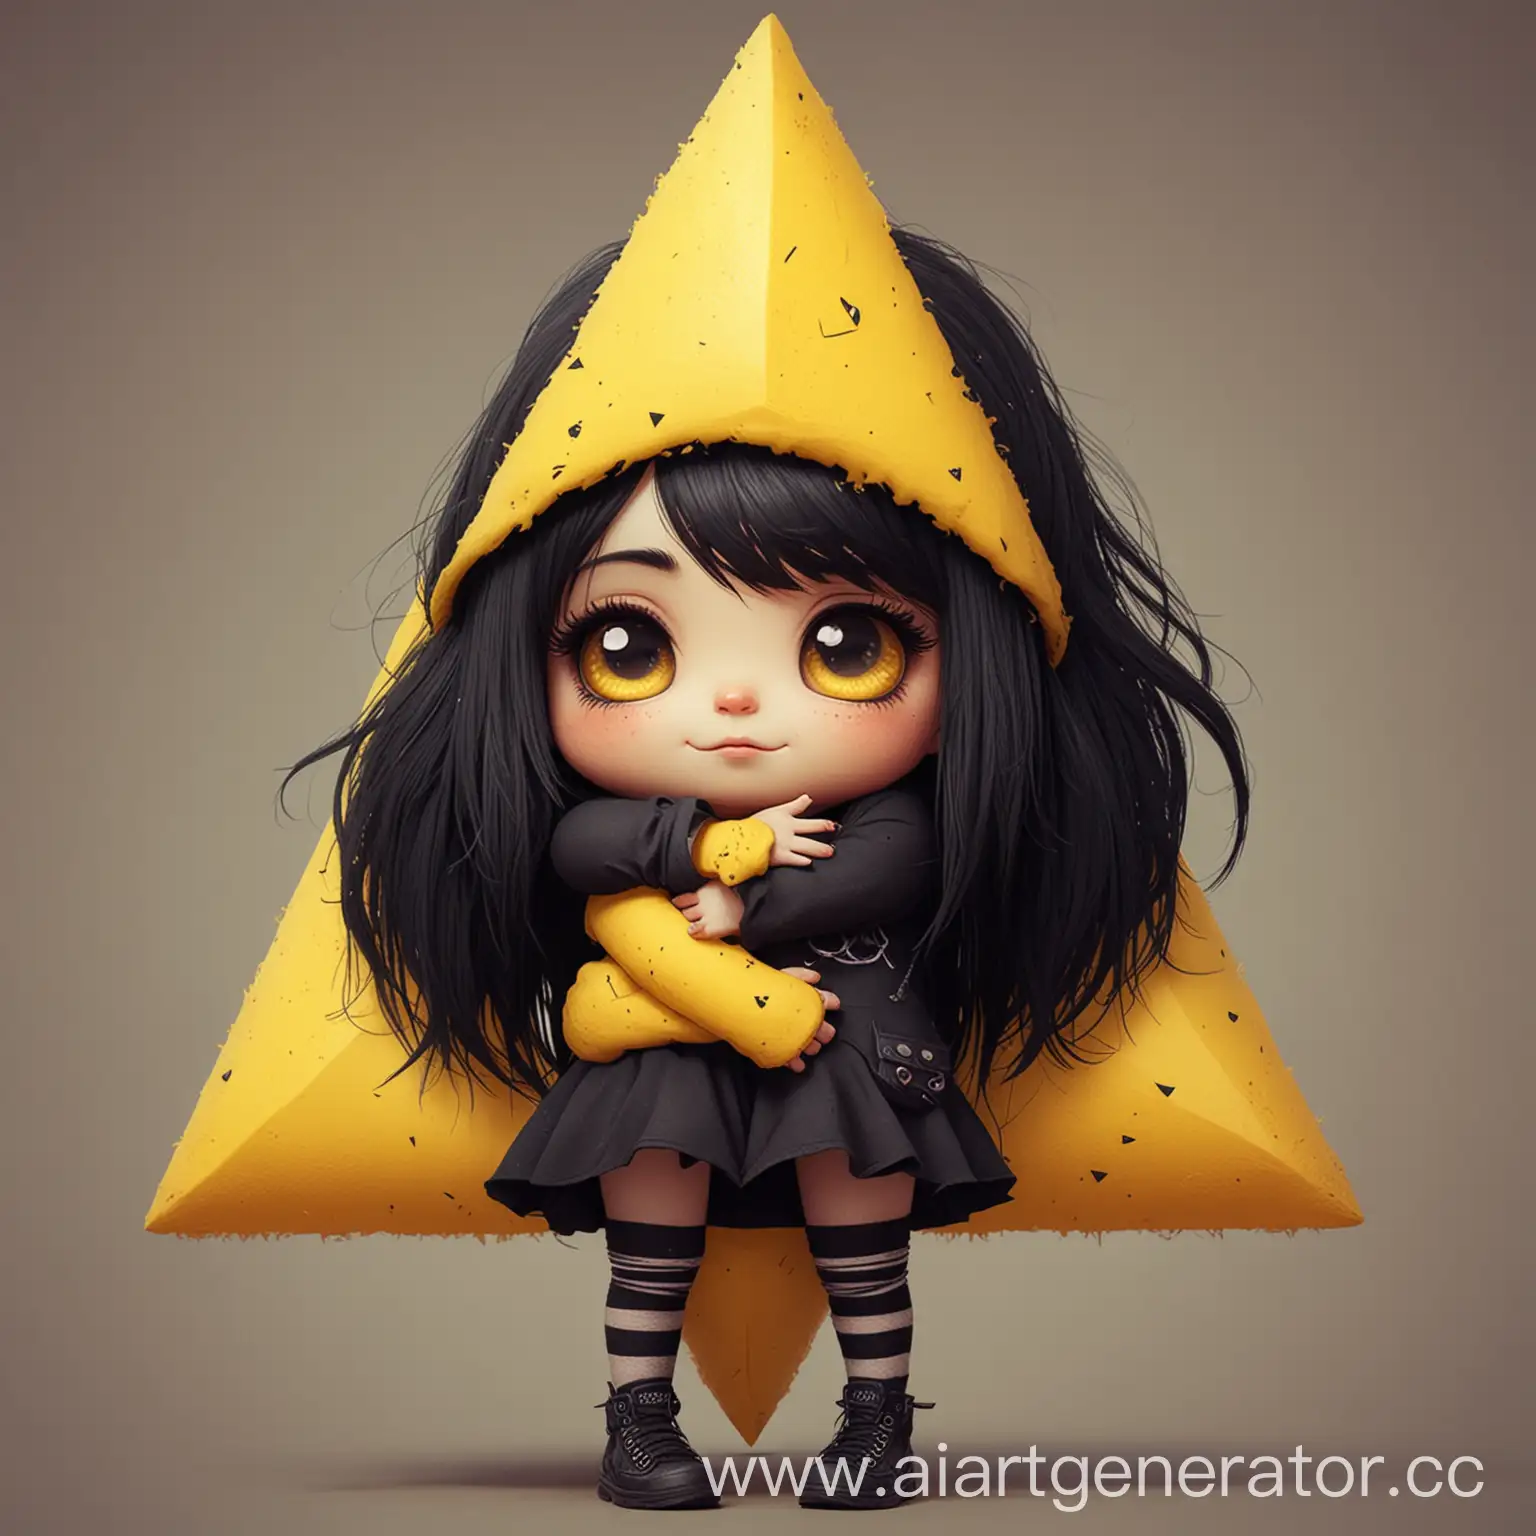 Cute-Monster-Yellow-Triangle-Hugging-Goth-Girl-with-Black-Hair